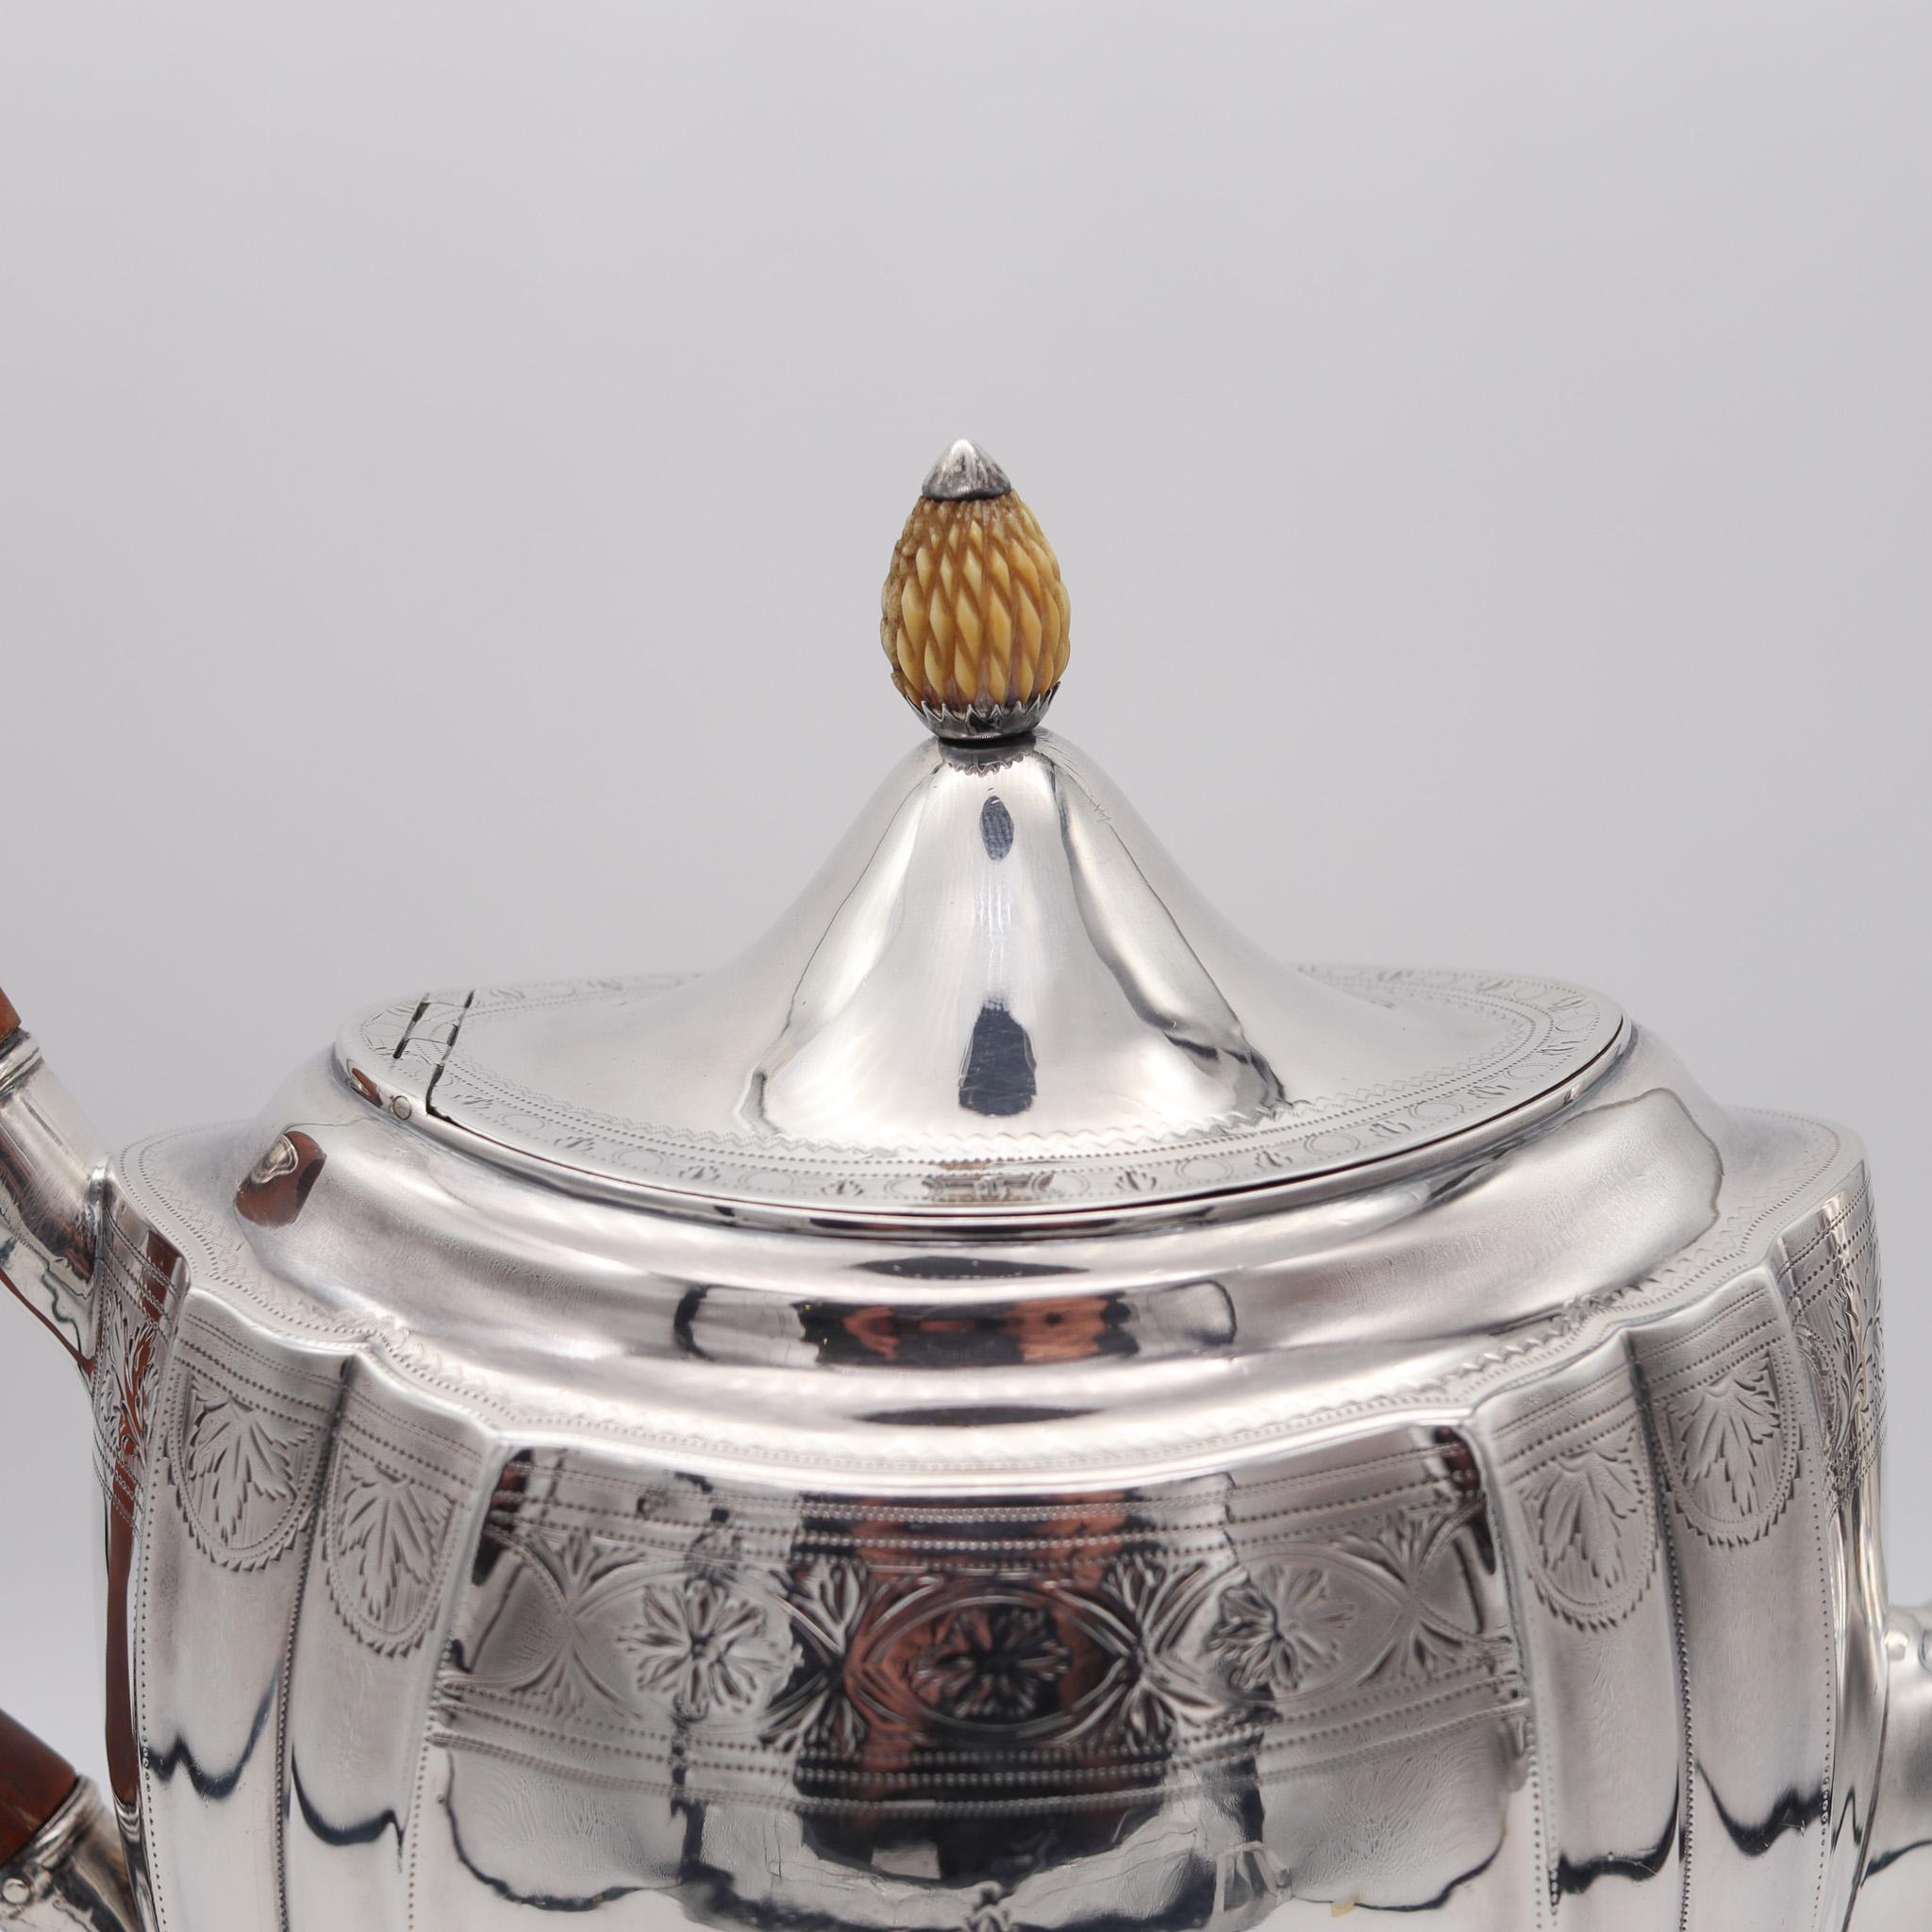 Coffee tea pot designed in Dublin by Richard Sawyer.

Very rare and important coffee tea pot, created in the city of Dublin in Ireland, United Kingdom by the silversmith Richard Sawyer. This beautiful piece has been crafted during the reigning